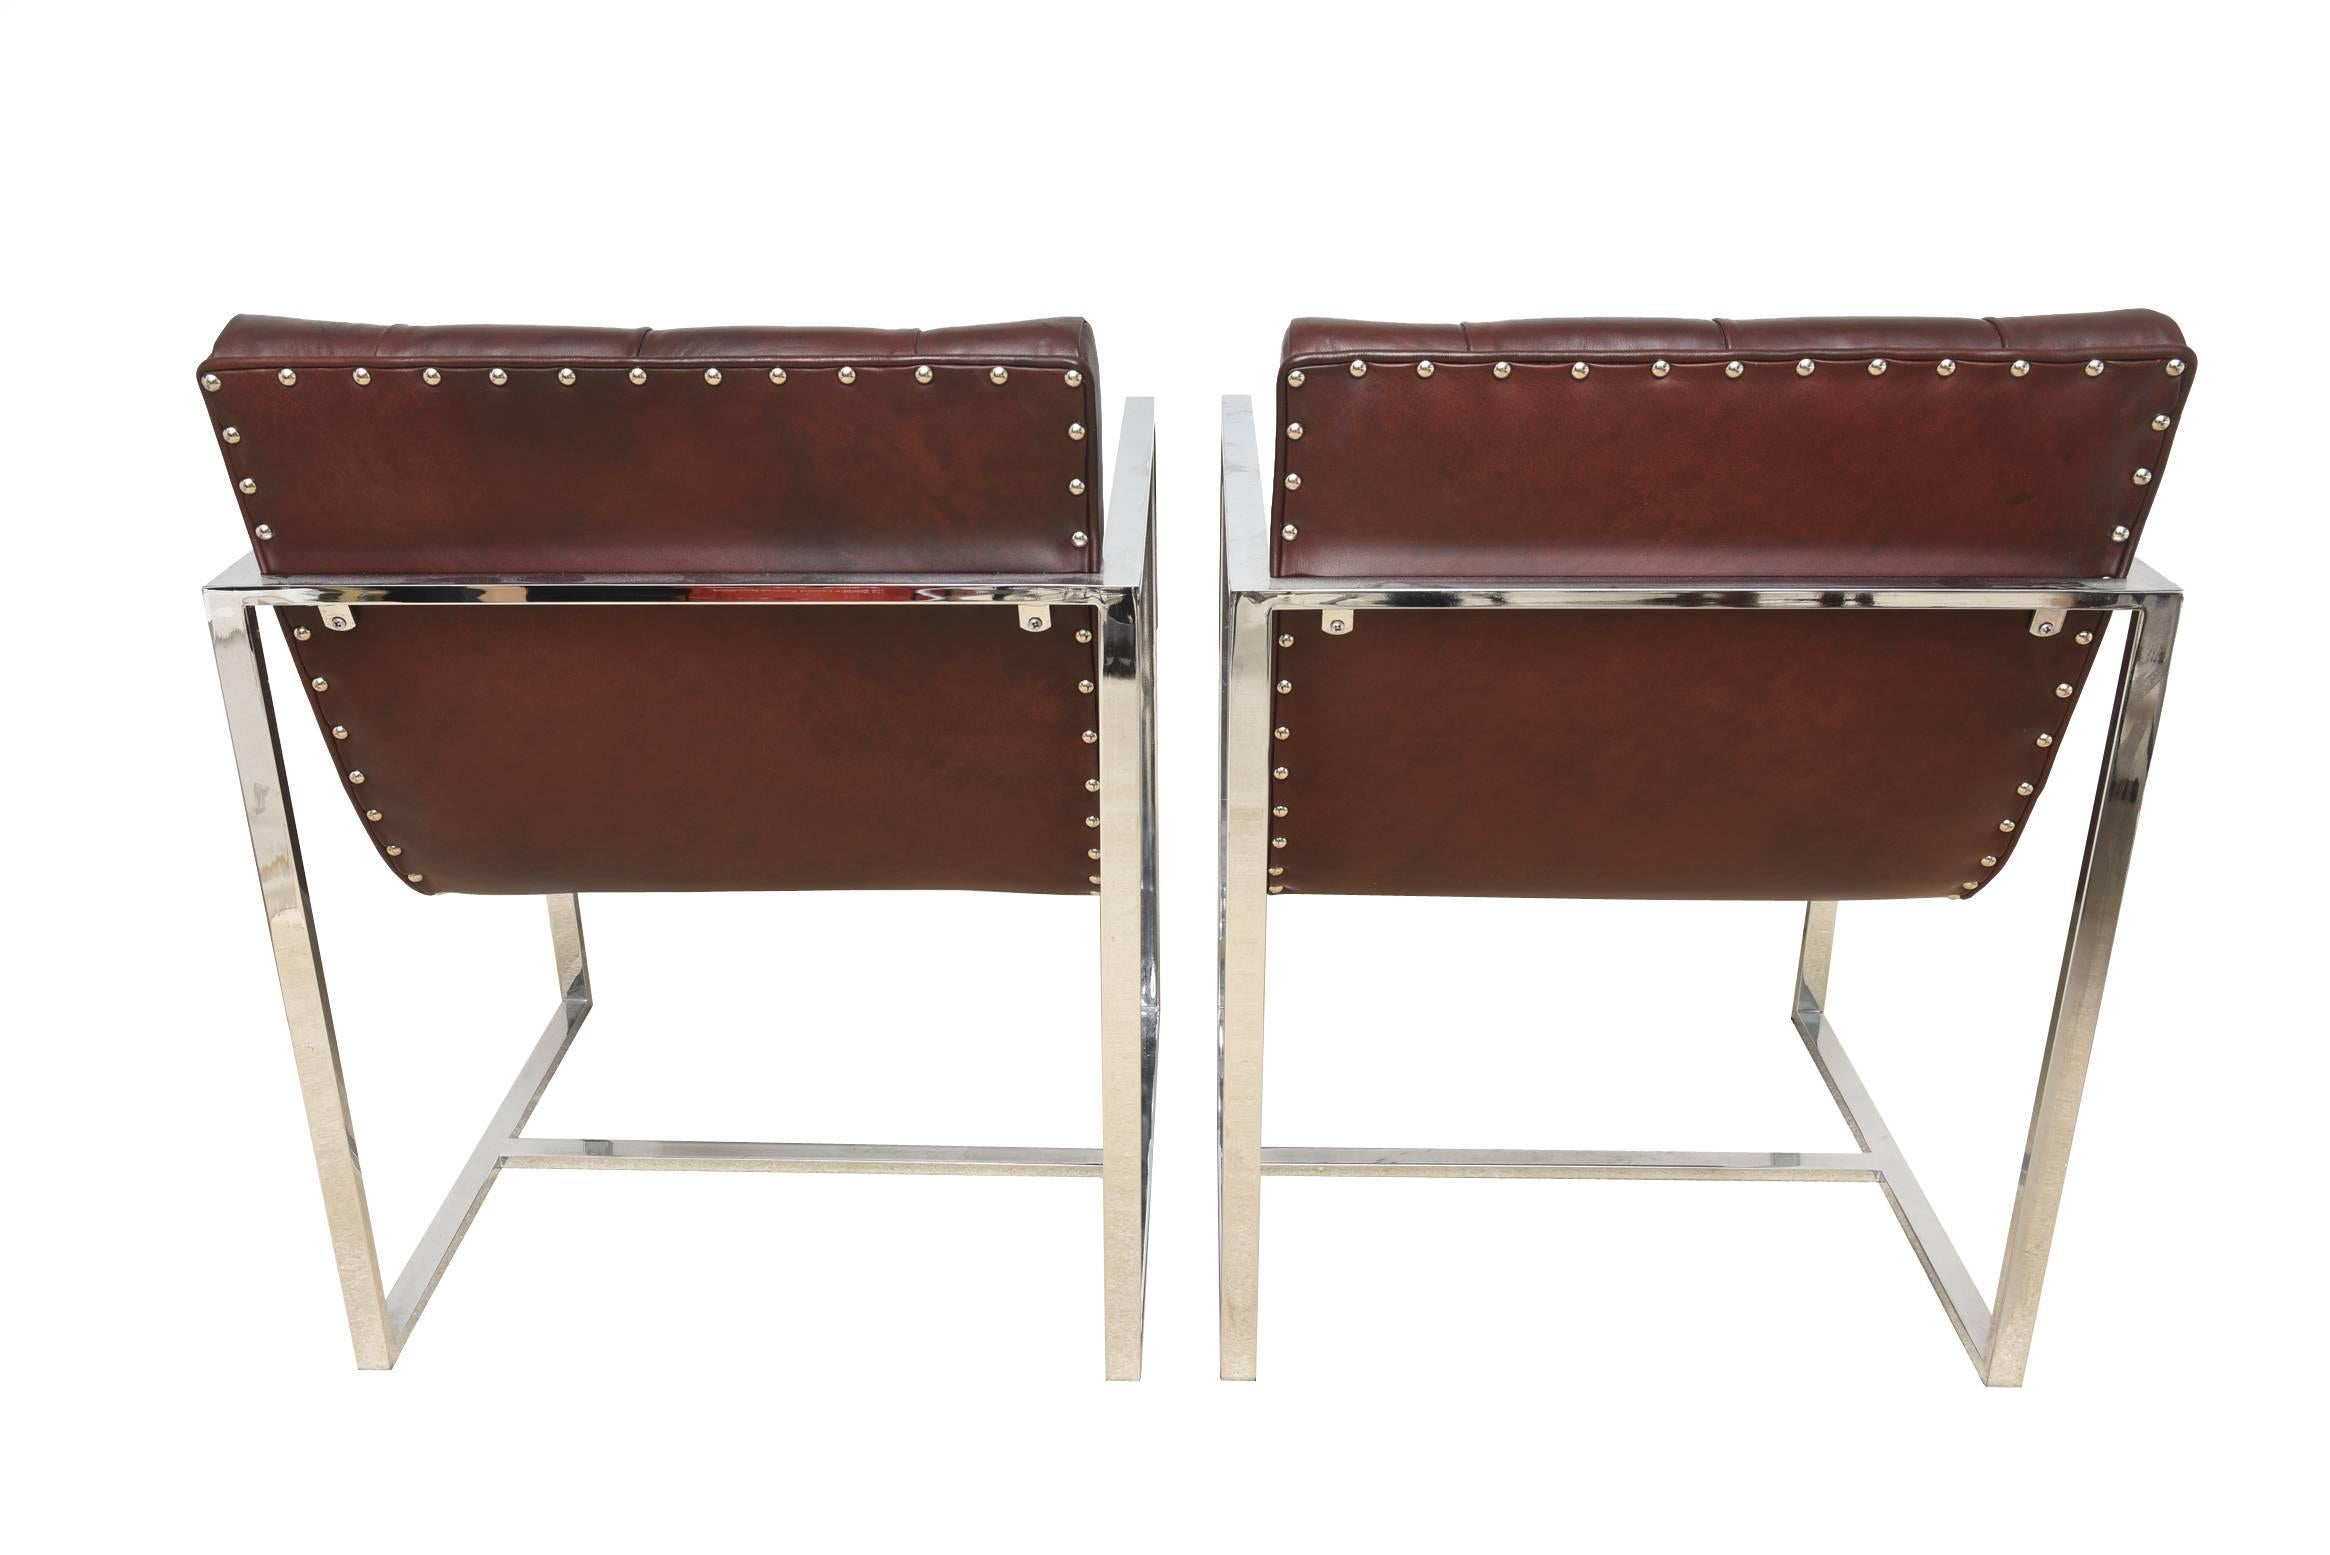 Modern Milo Baughman Attr. Burgundy Leather Tufted Chrome Cube Side Chairs Vintage Pair For Sale